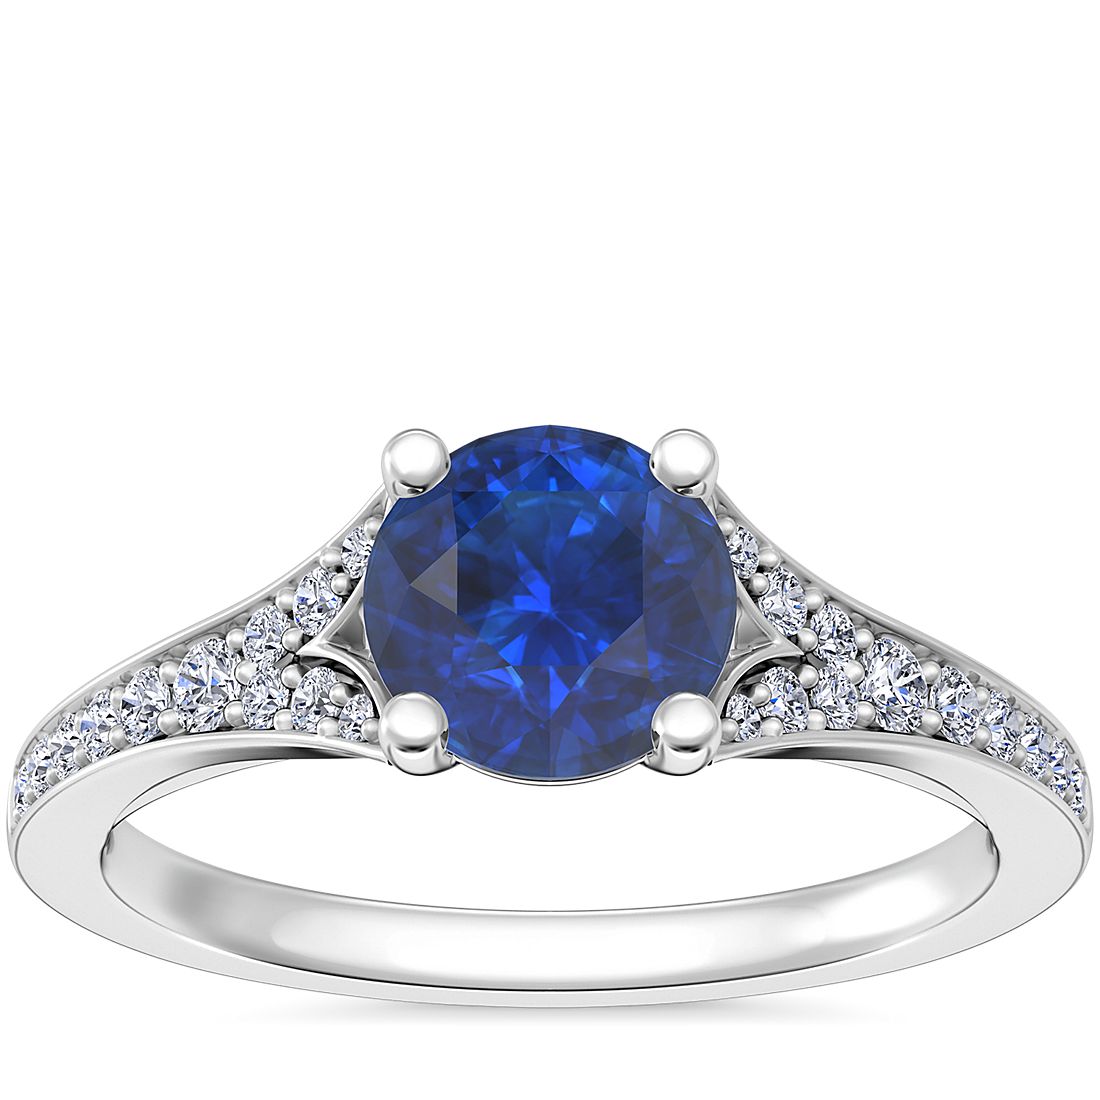 Petite Split Shank Pavé Cathedral Engagement Ring with Round Sapphire in Platinum (6mm)